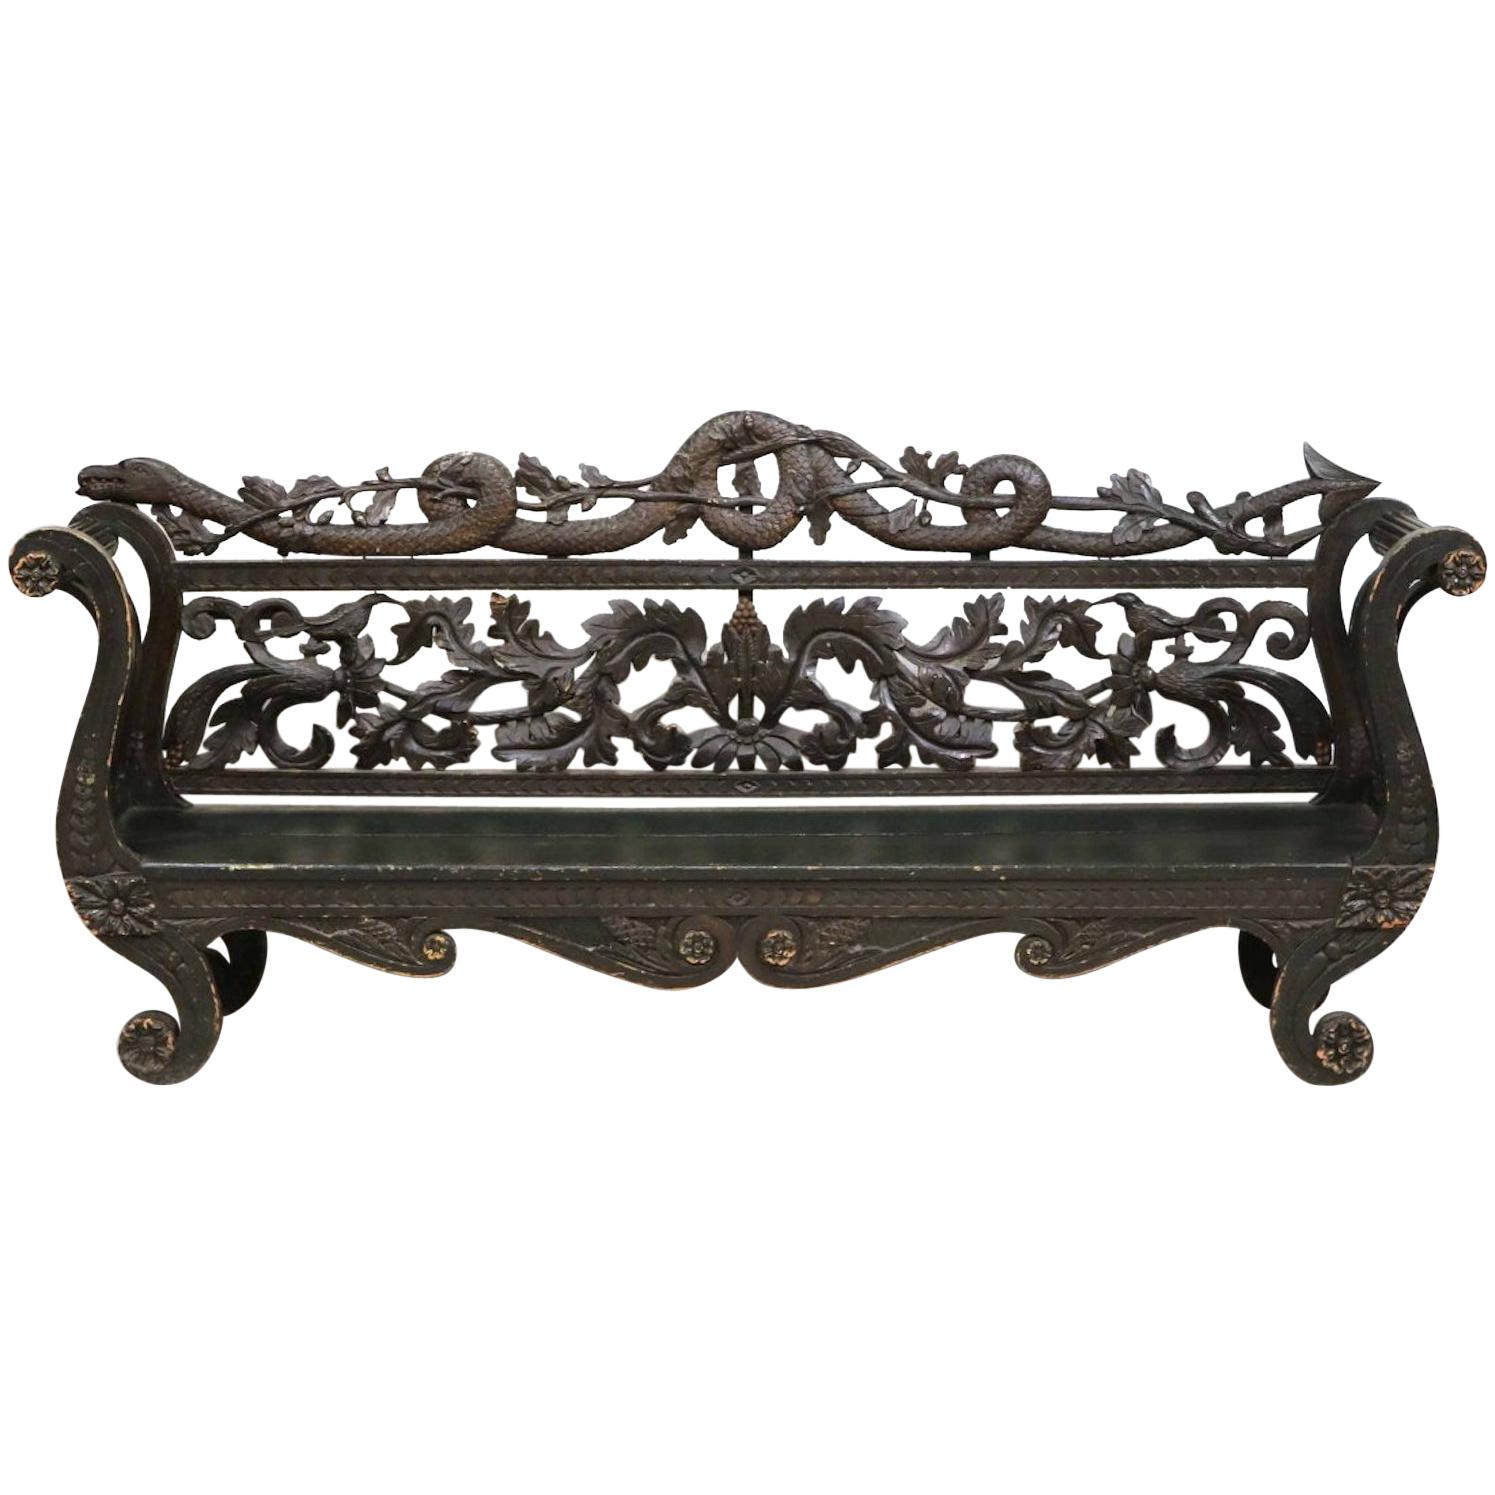 19th Century Neoclassical Carved Settee with Serpent Form